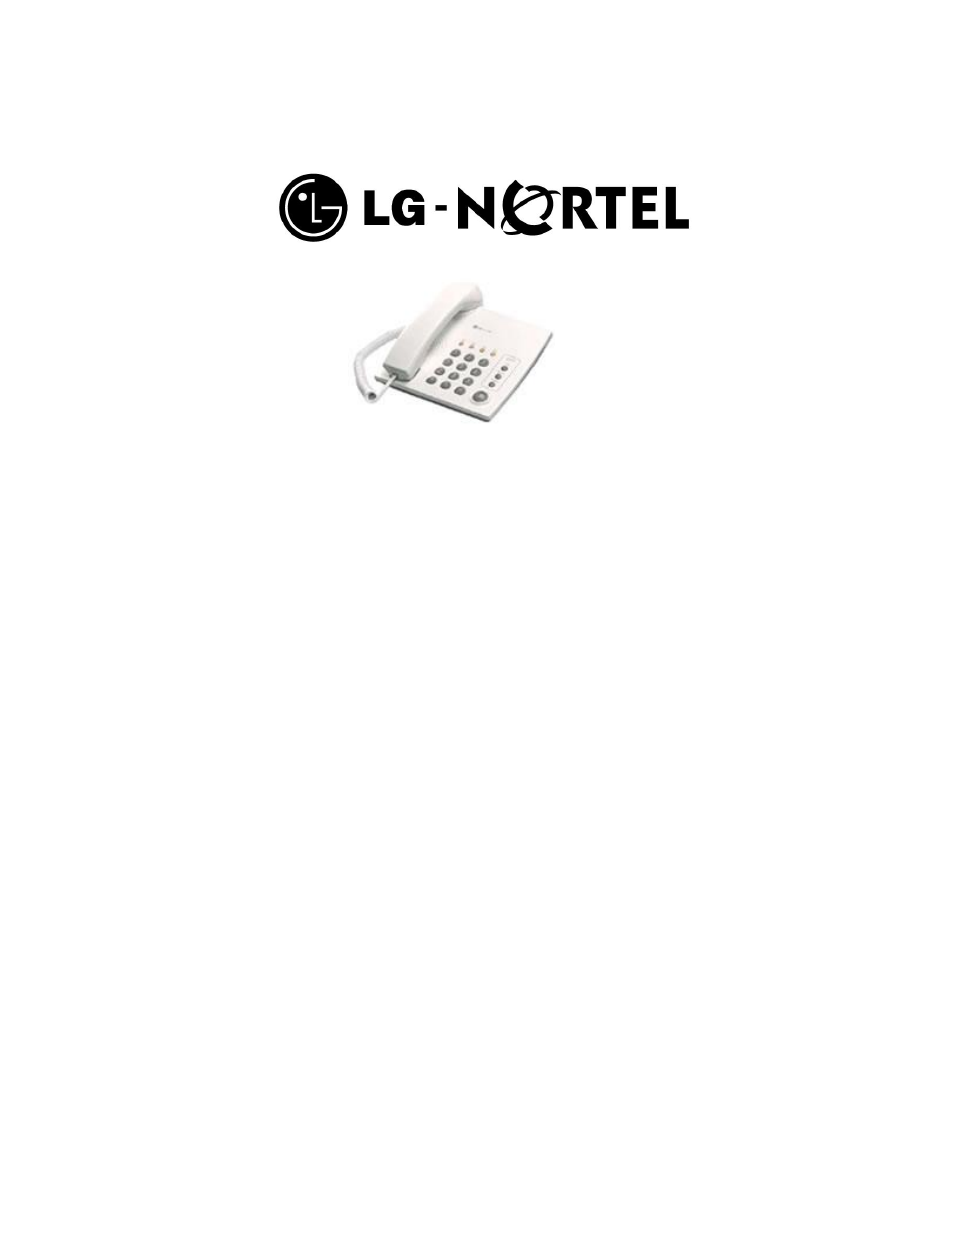 LG SINGLE LINE TELEPHONE LKA-200 User Manual | 6 pages